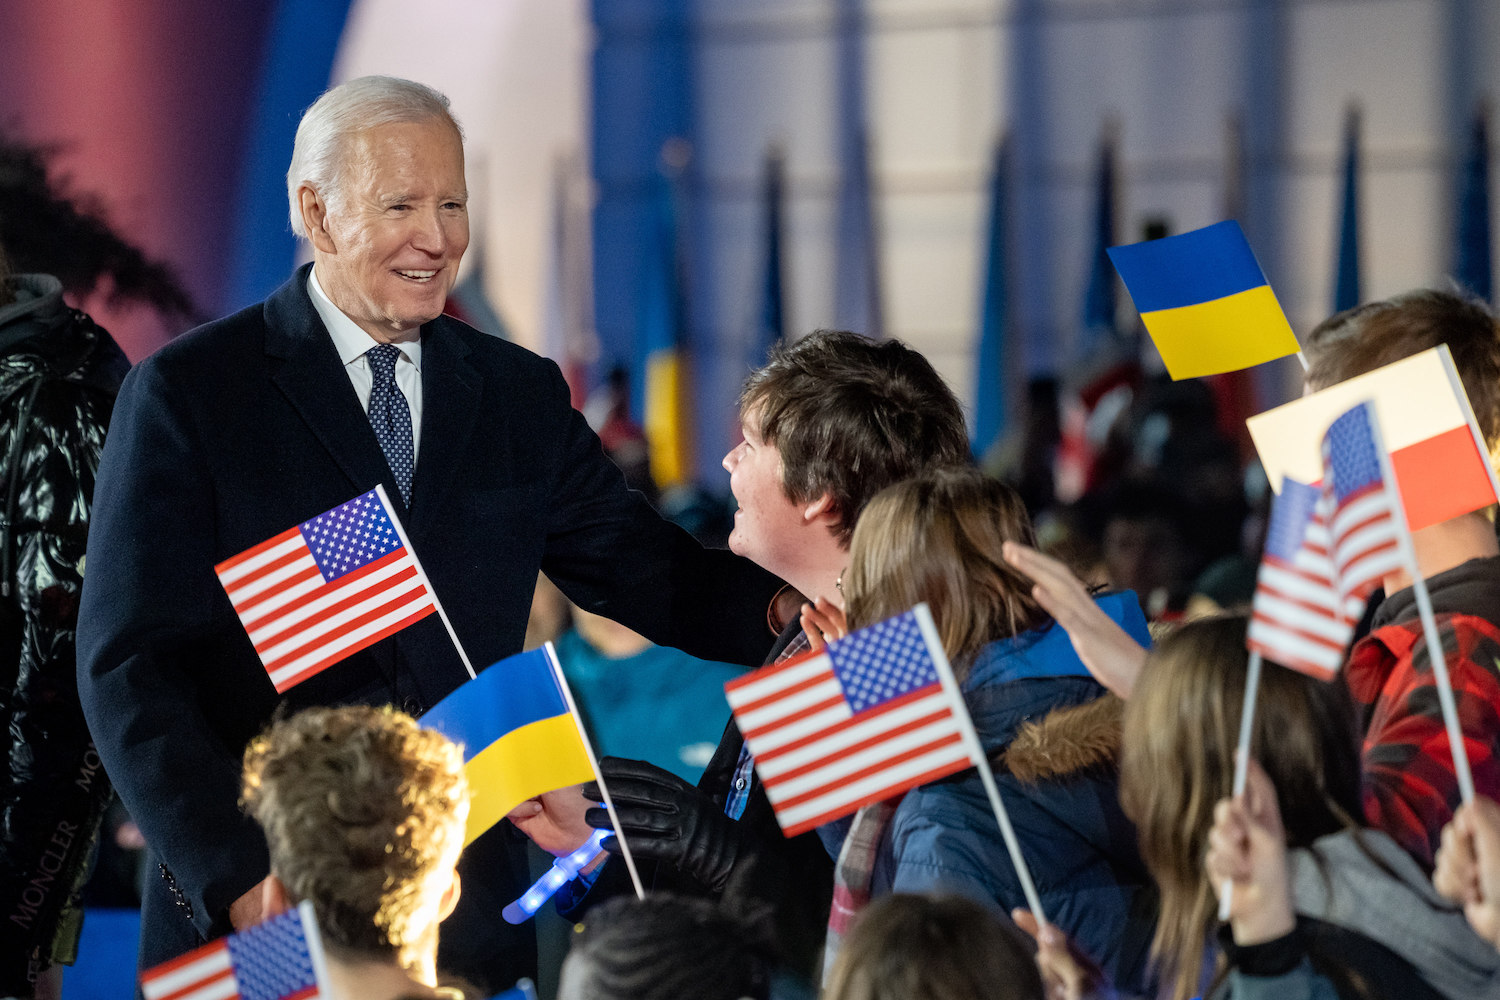 How Can Biden Model Success For The Next Generation If He Can’t Even Explain What It Is?